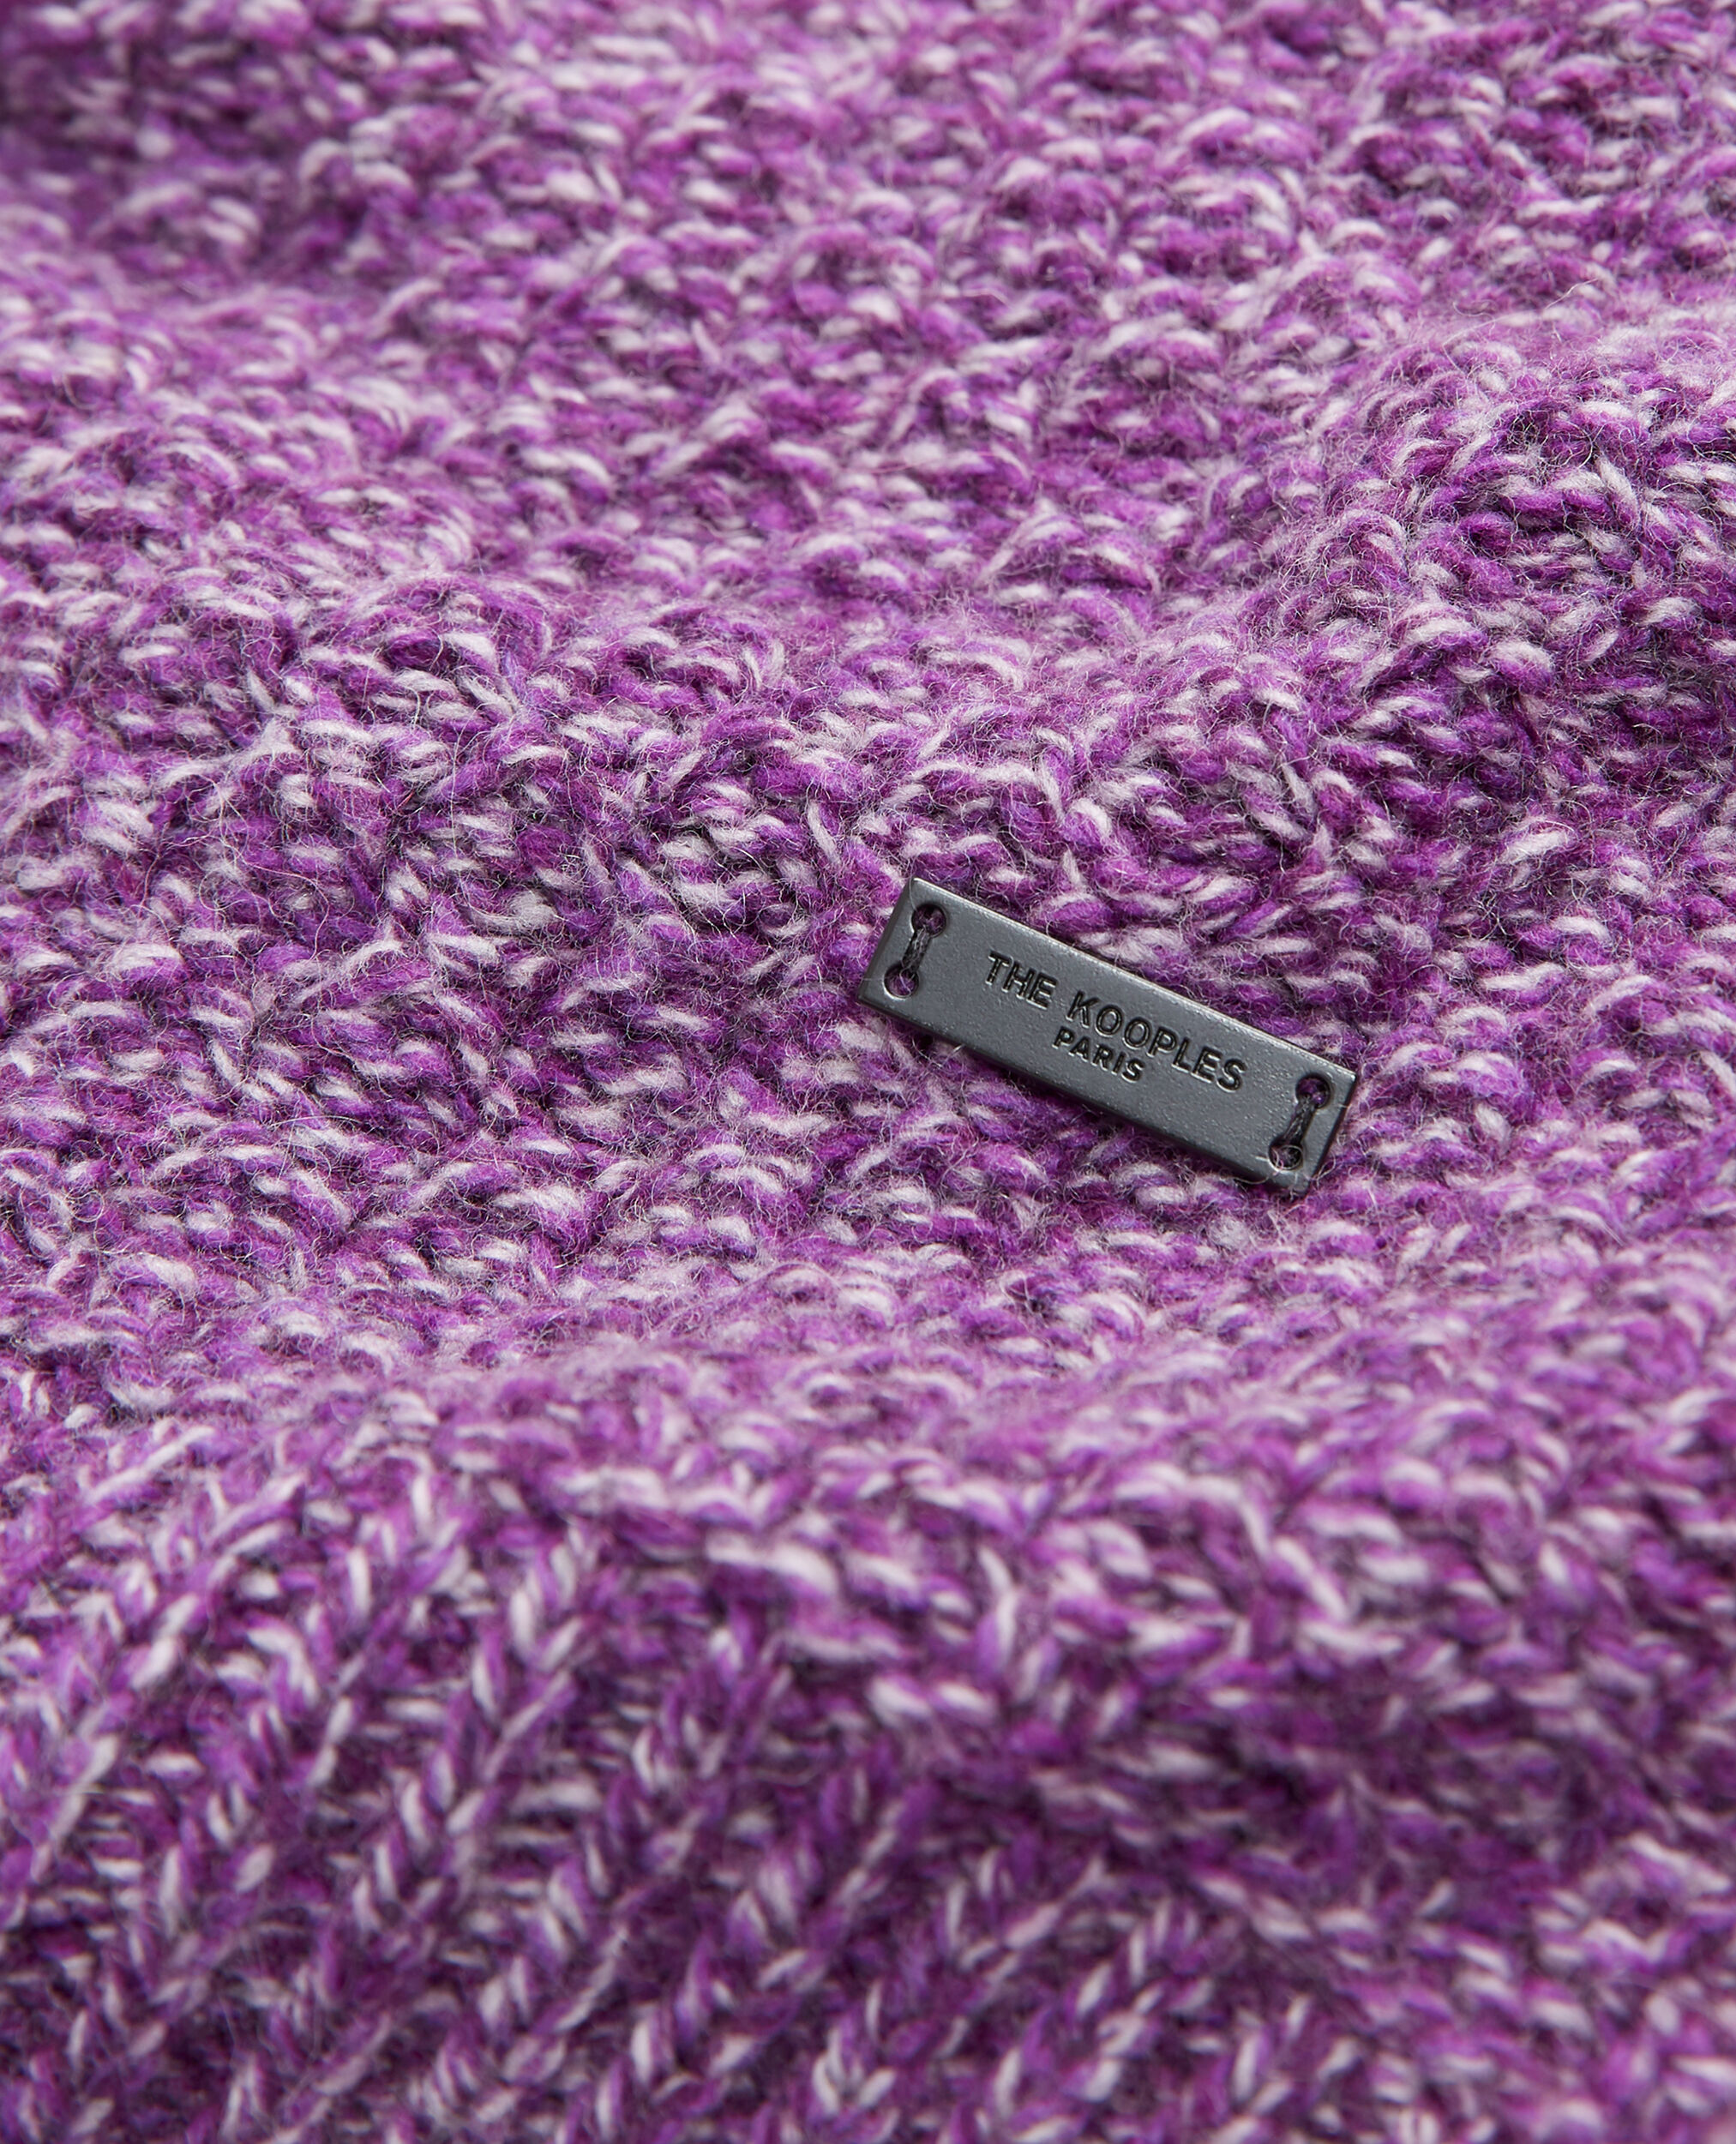 Purple wool sweater with a honeycomb texture, PURPLE, hi-res image number null